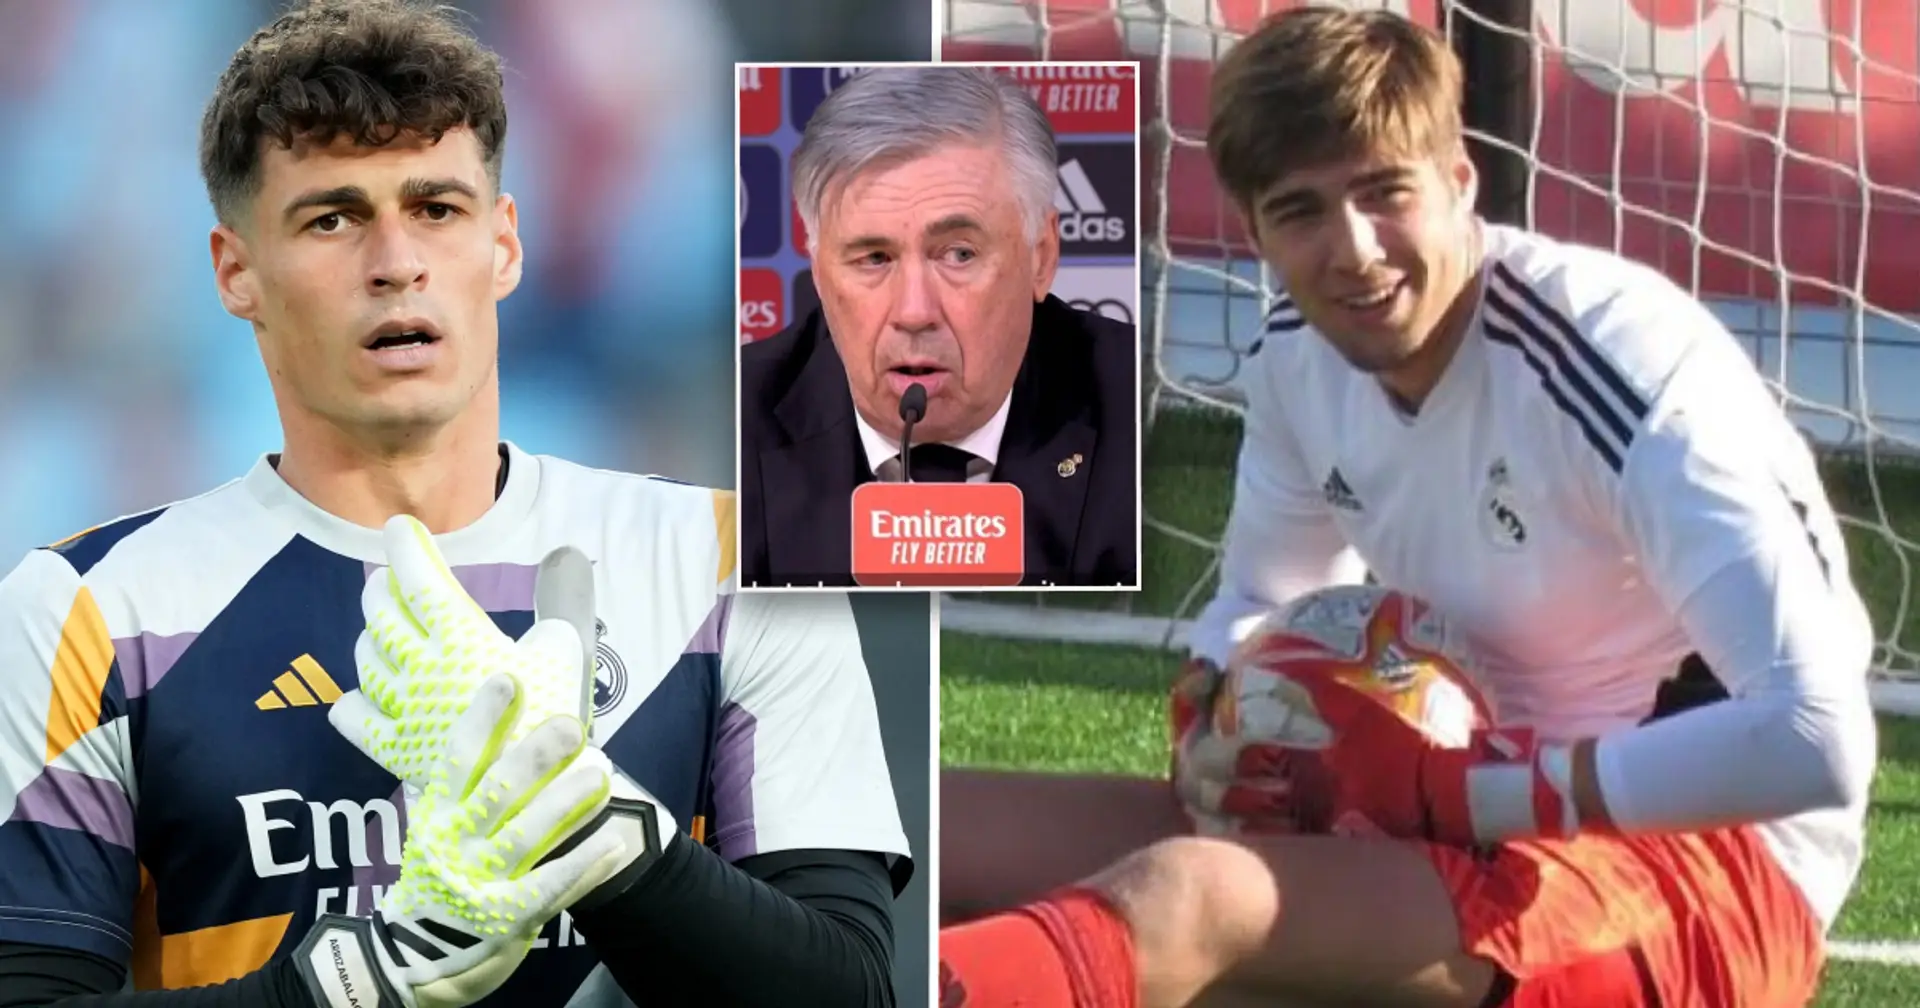 Why Ancelotti registered 6 goalkeepers and just 5 attackers for Champions group stage: Explained